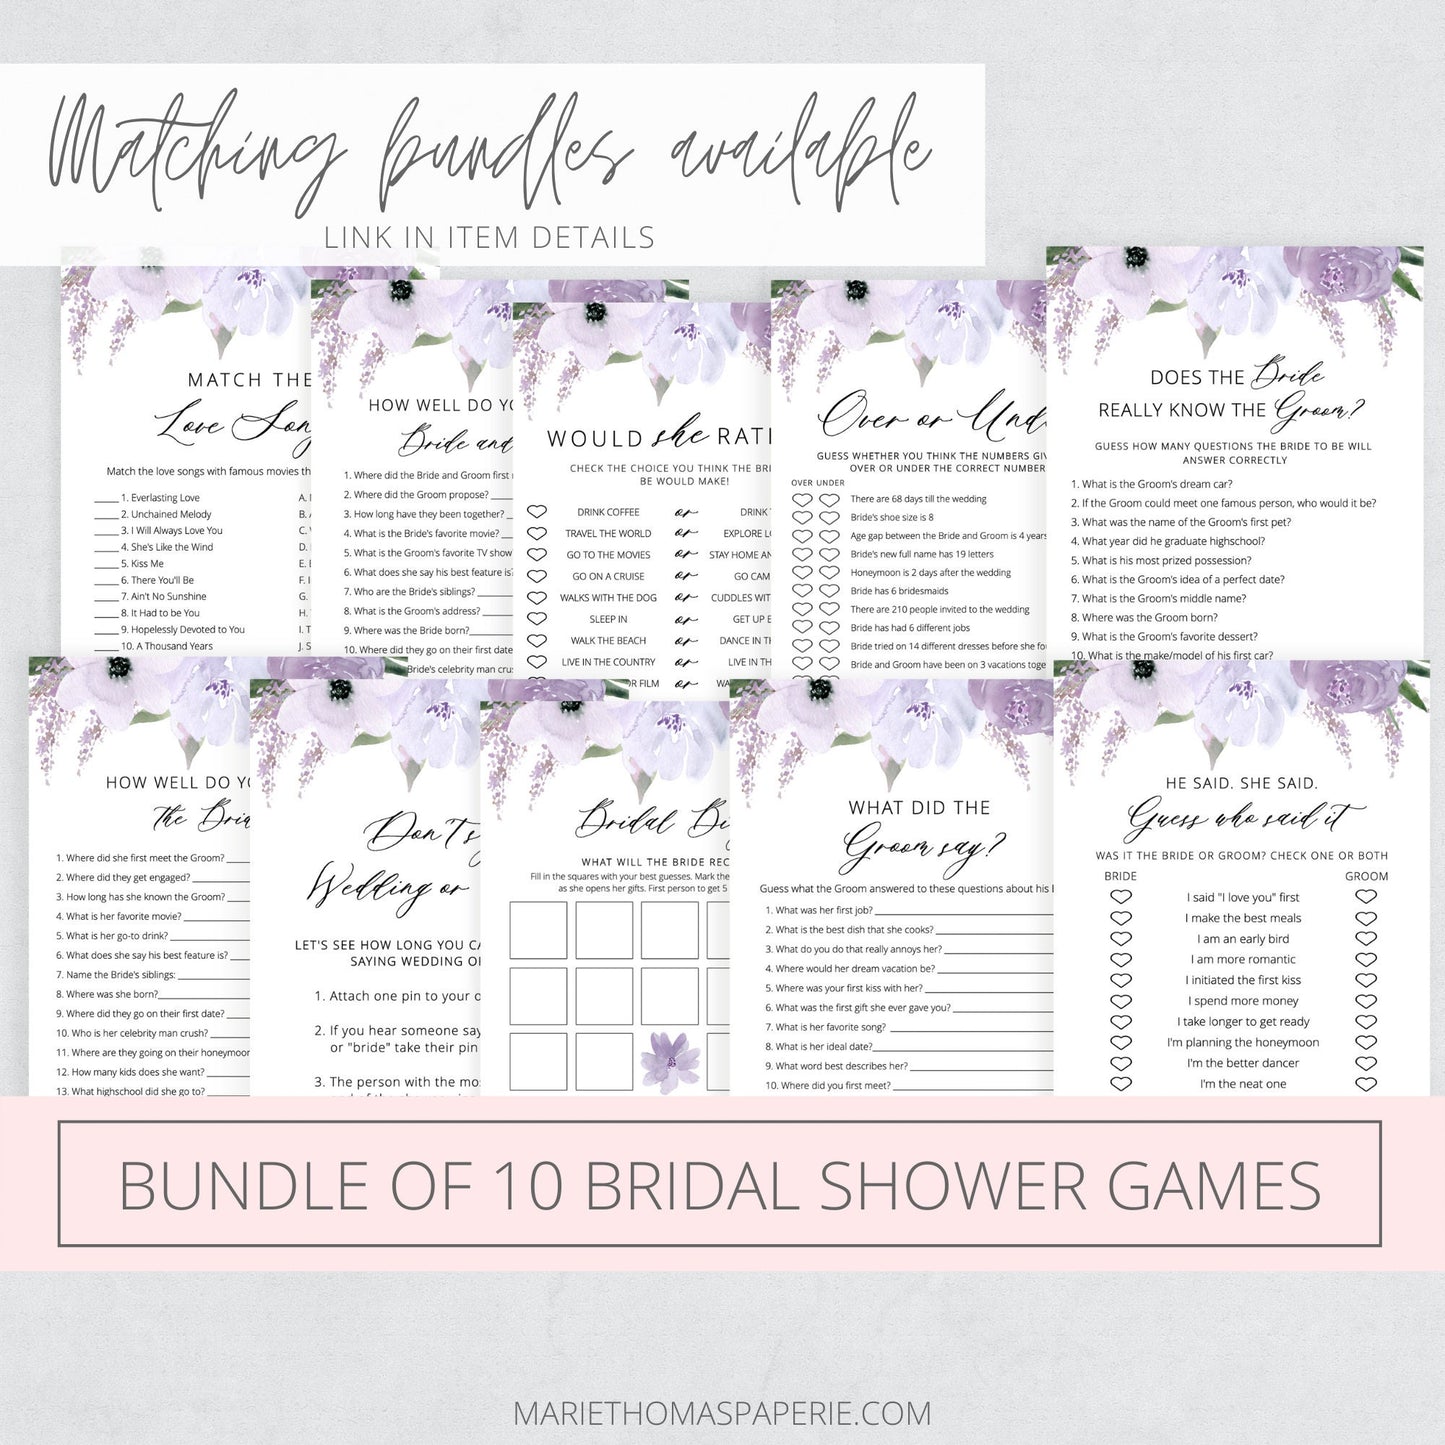 Editable How Well Do You Know the Bride Bridal Shower Games Virtual Lavender Purple Floral Template